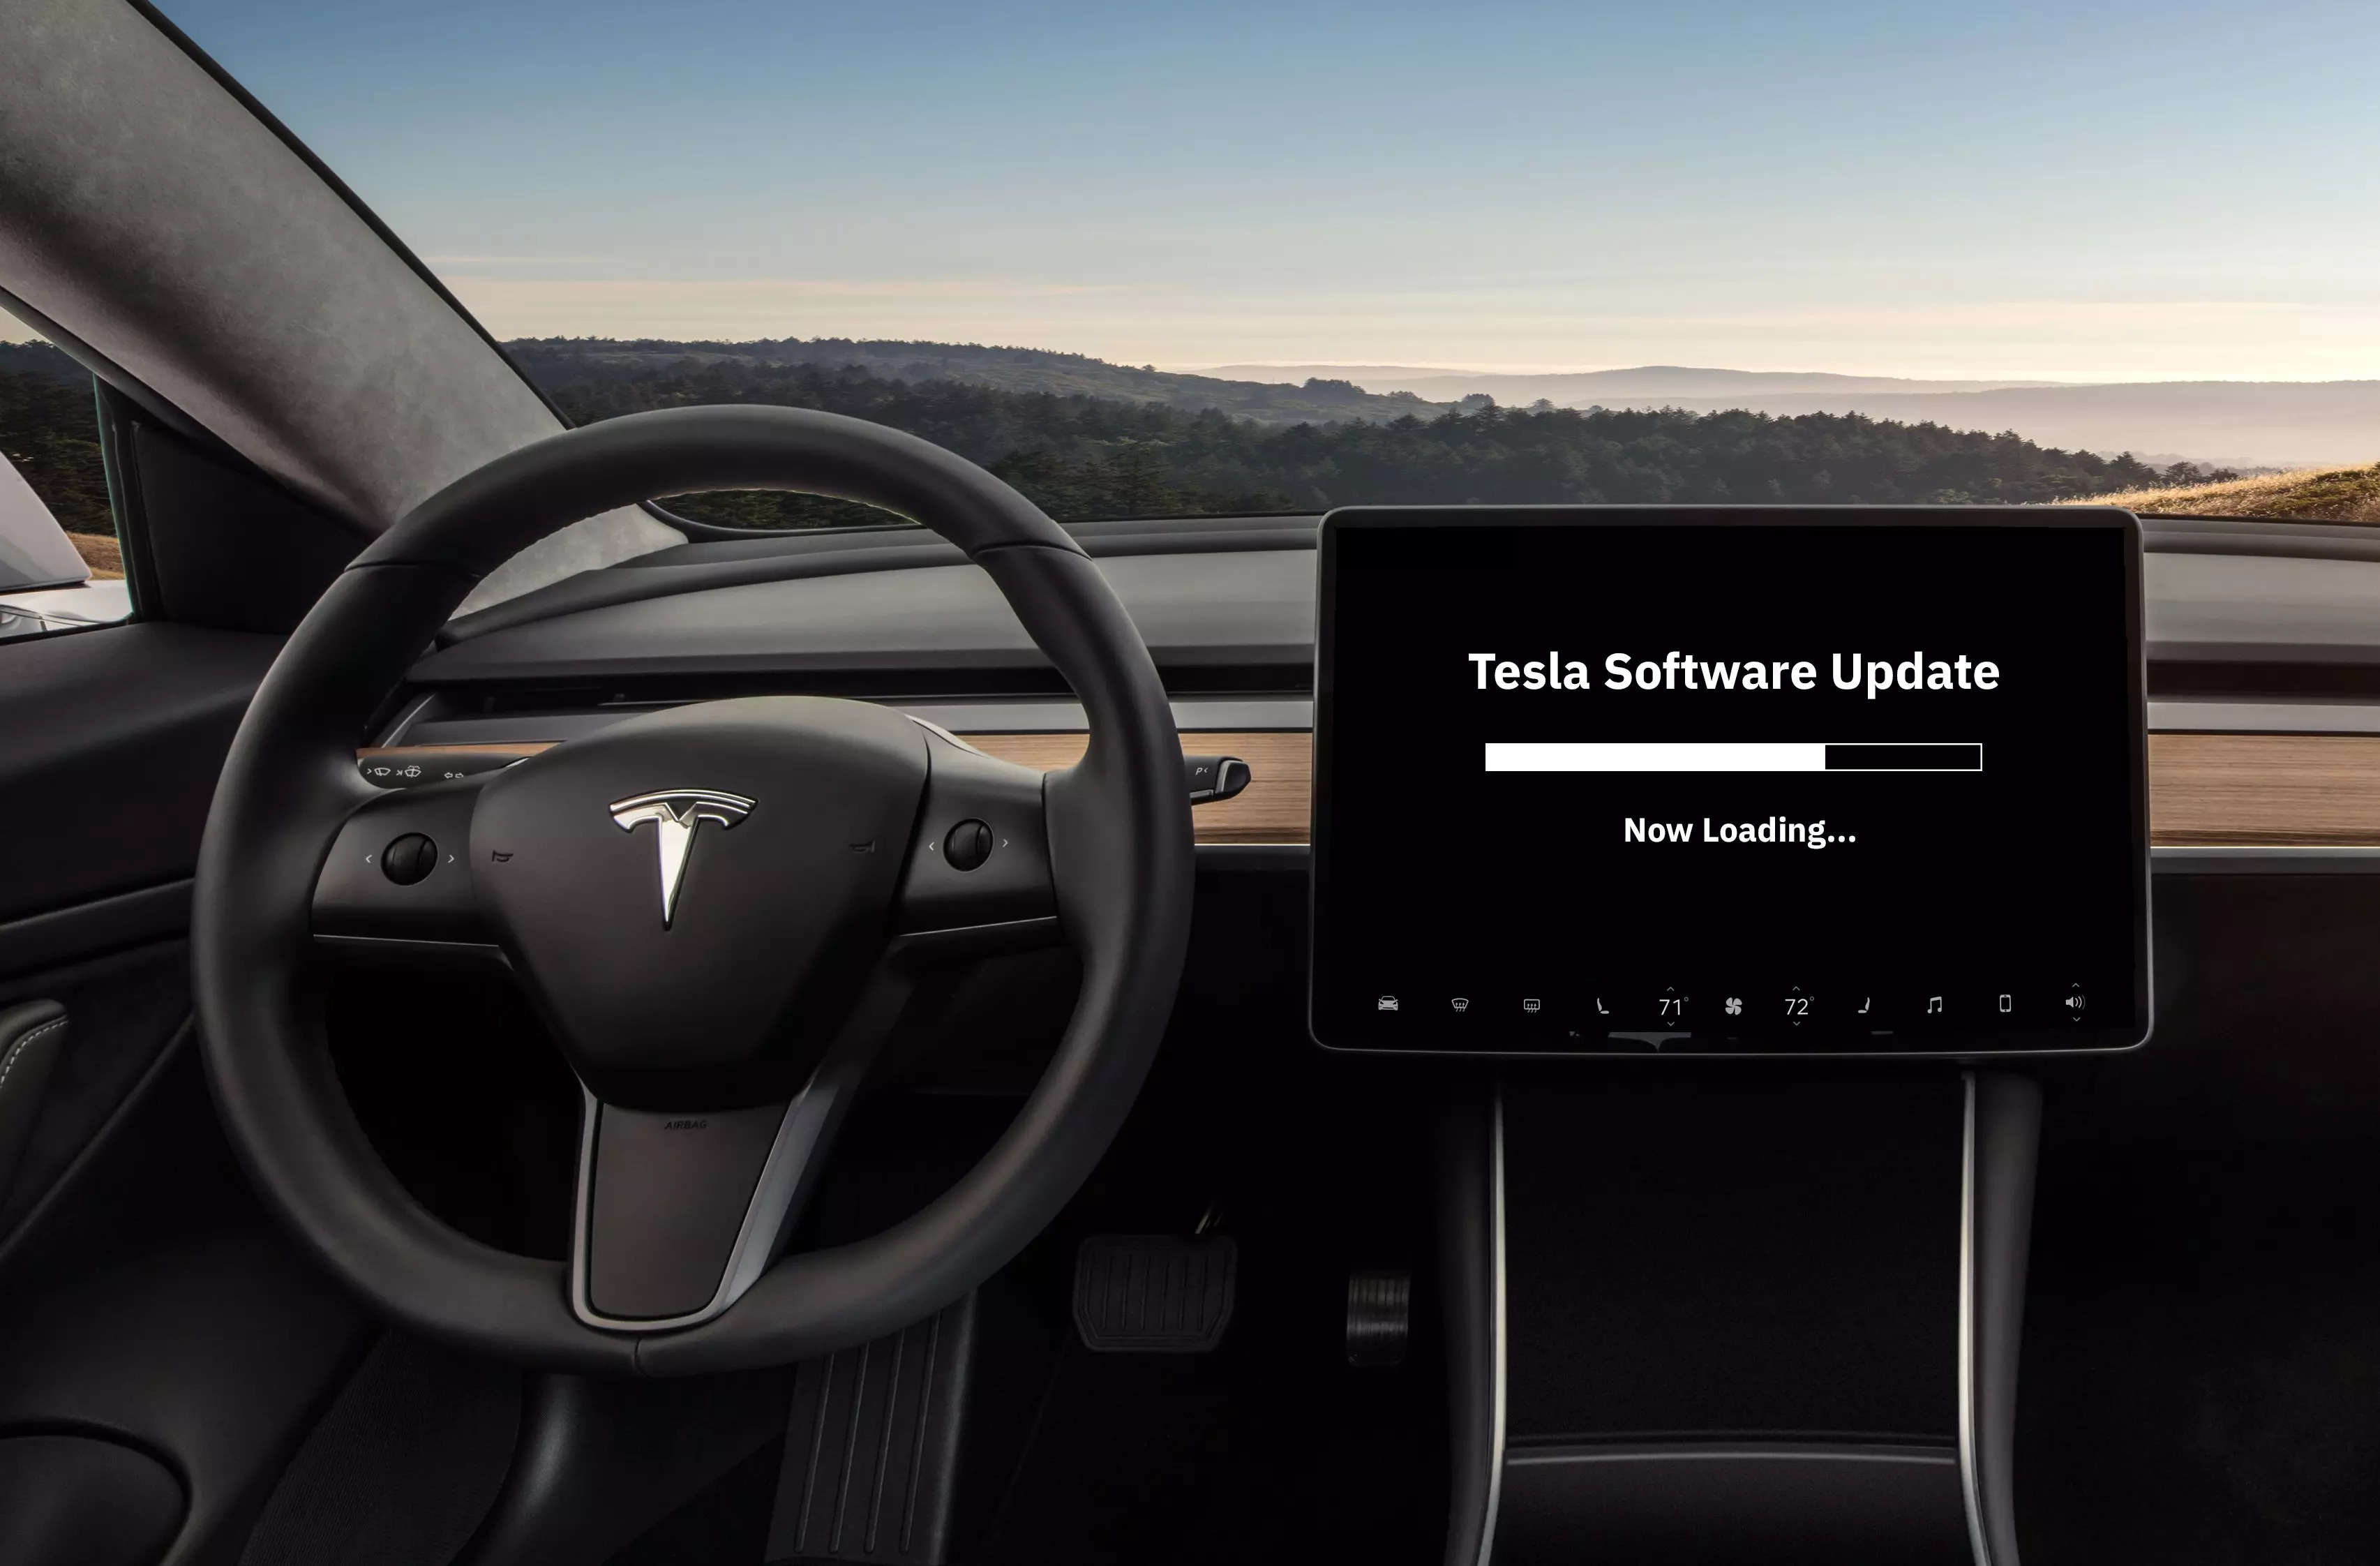 FSD is an advanced driver assistance system that handles some driving tasks but Tesla says does not make vehicles autonomous.